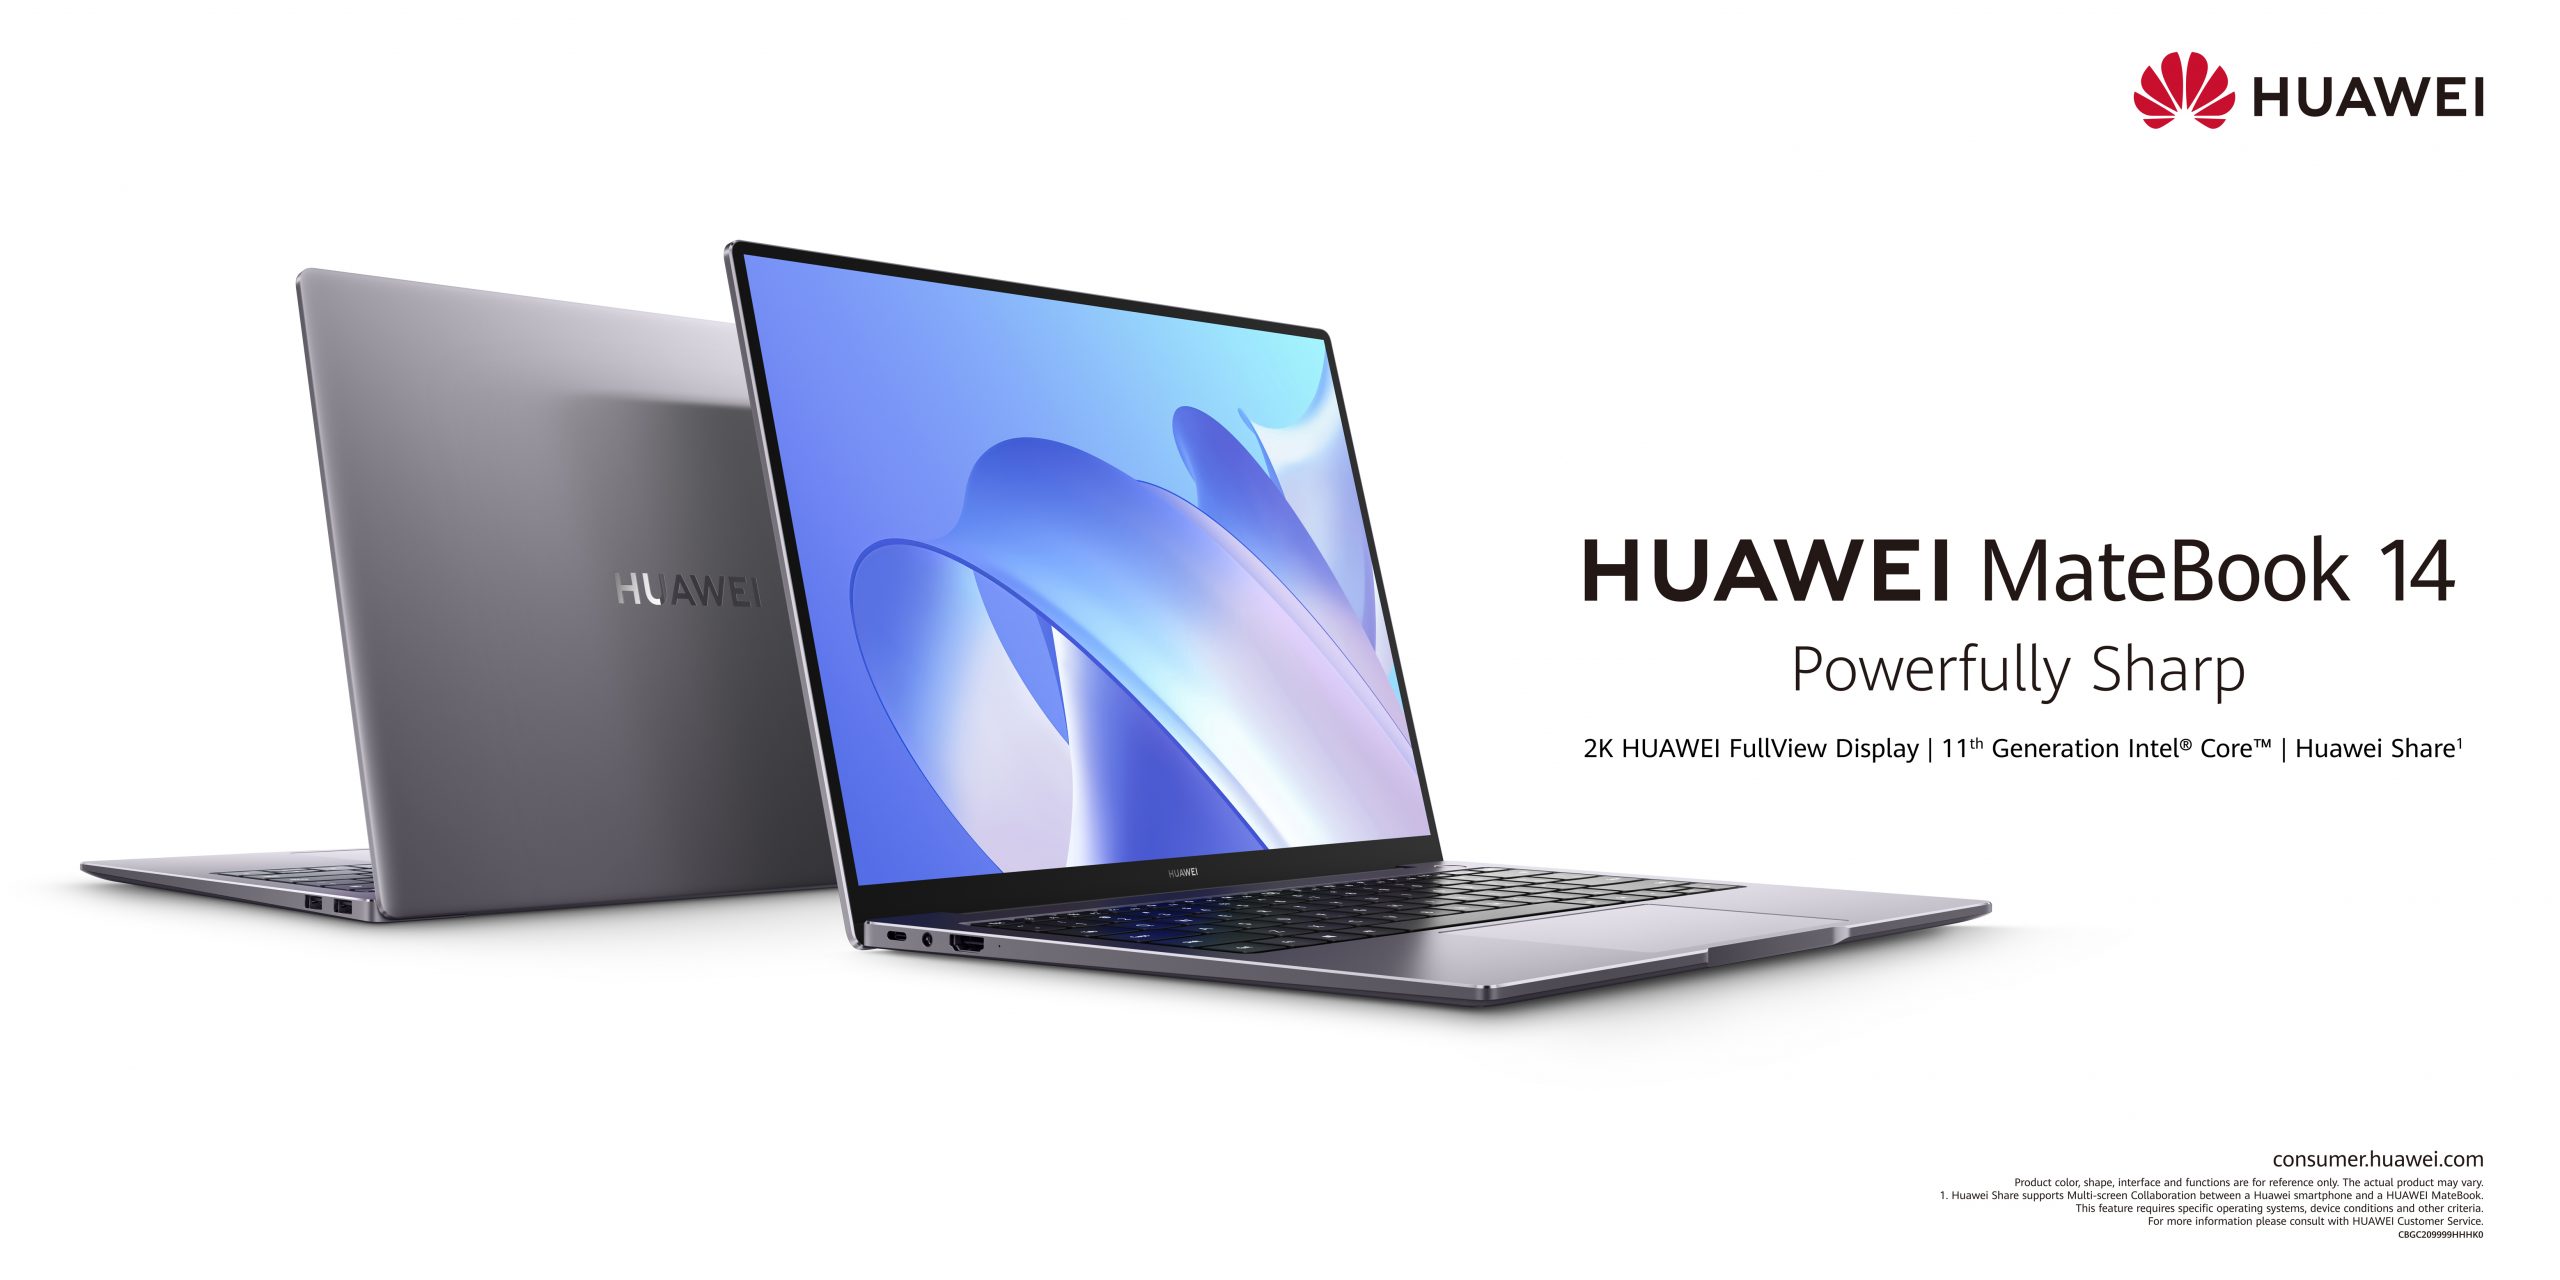 The sleek HUAWEI MateBook 14 is the most functional and affordable laptop coming to Qatar